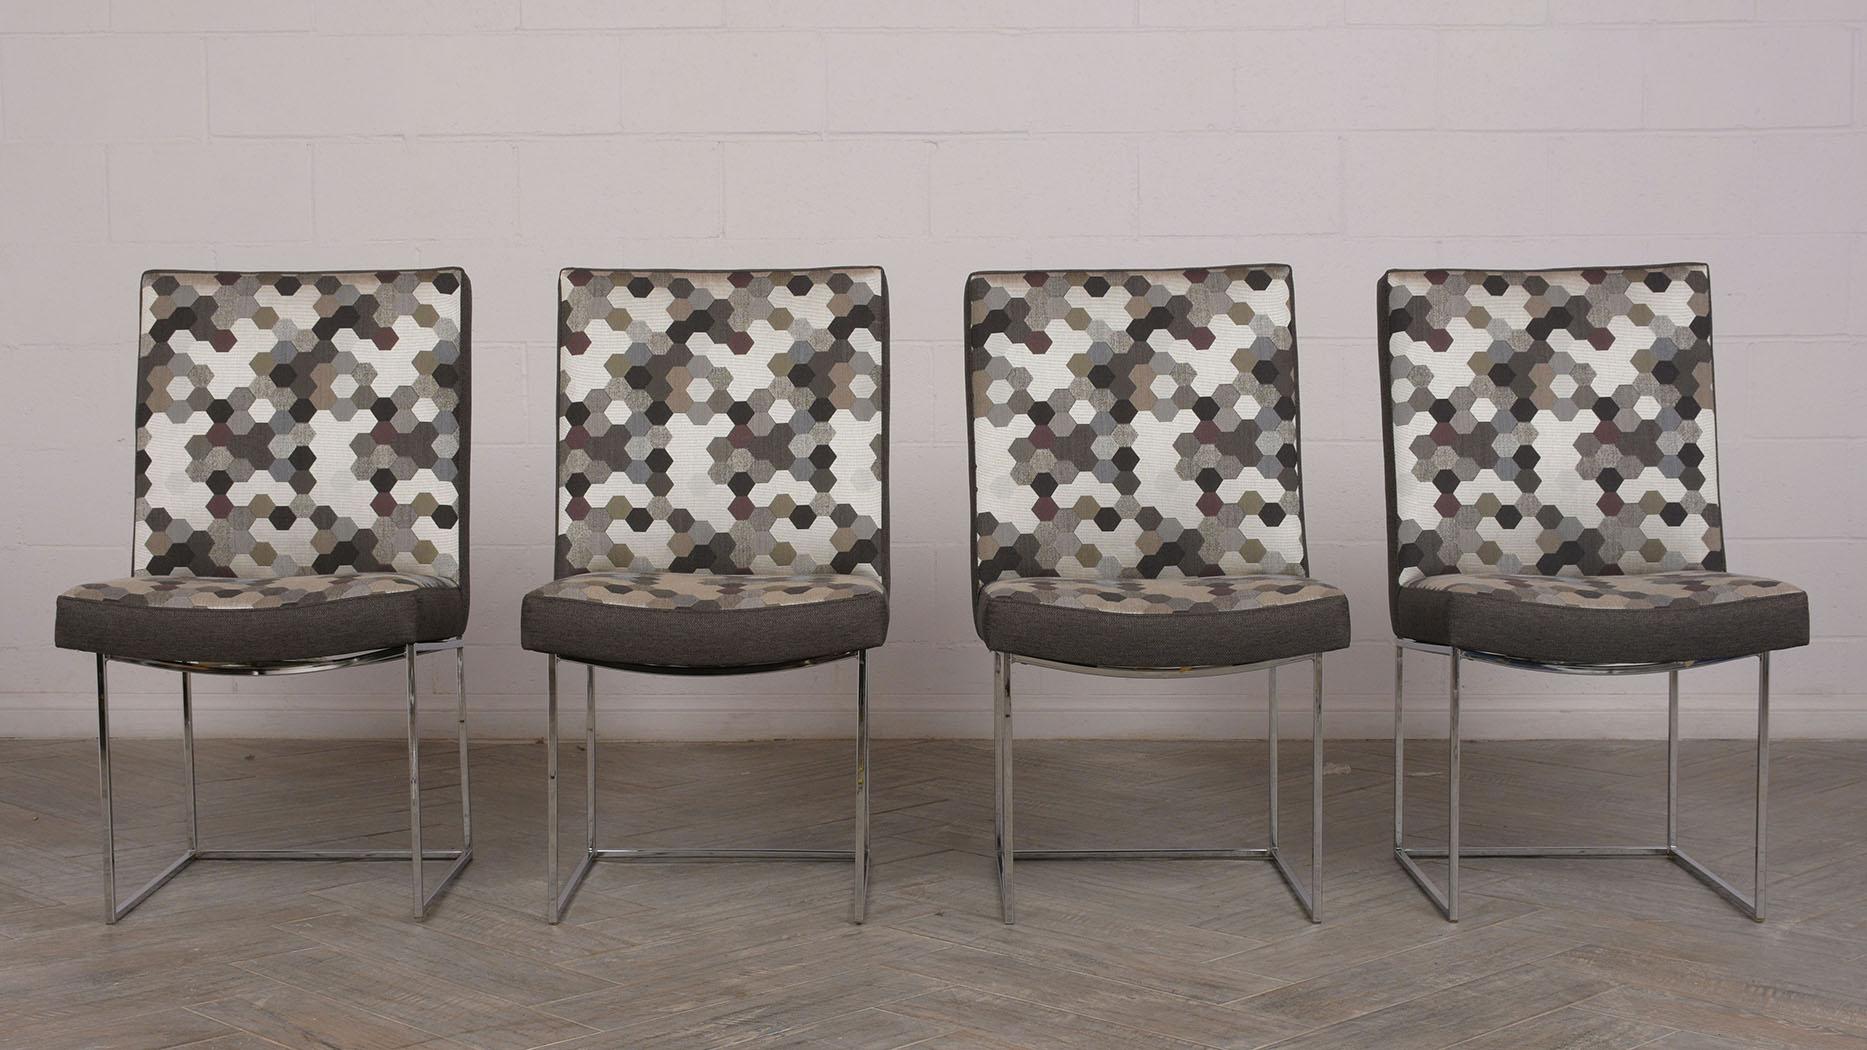 Set of 8 modern dining chairs. Chairs have a solid chrome square frame with curve seat. All chairs have been professionally reupholstered in a solid dark gray color on the back, sides, and front. The back and seat have a multicolored symmetrical